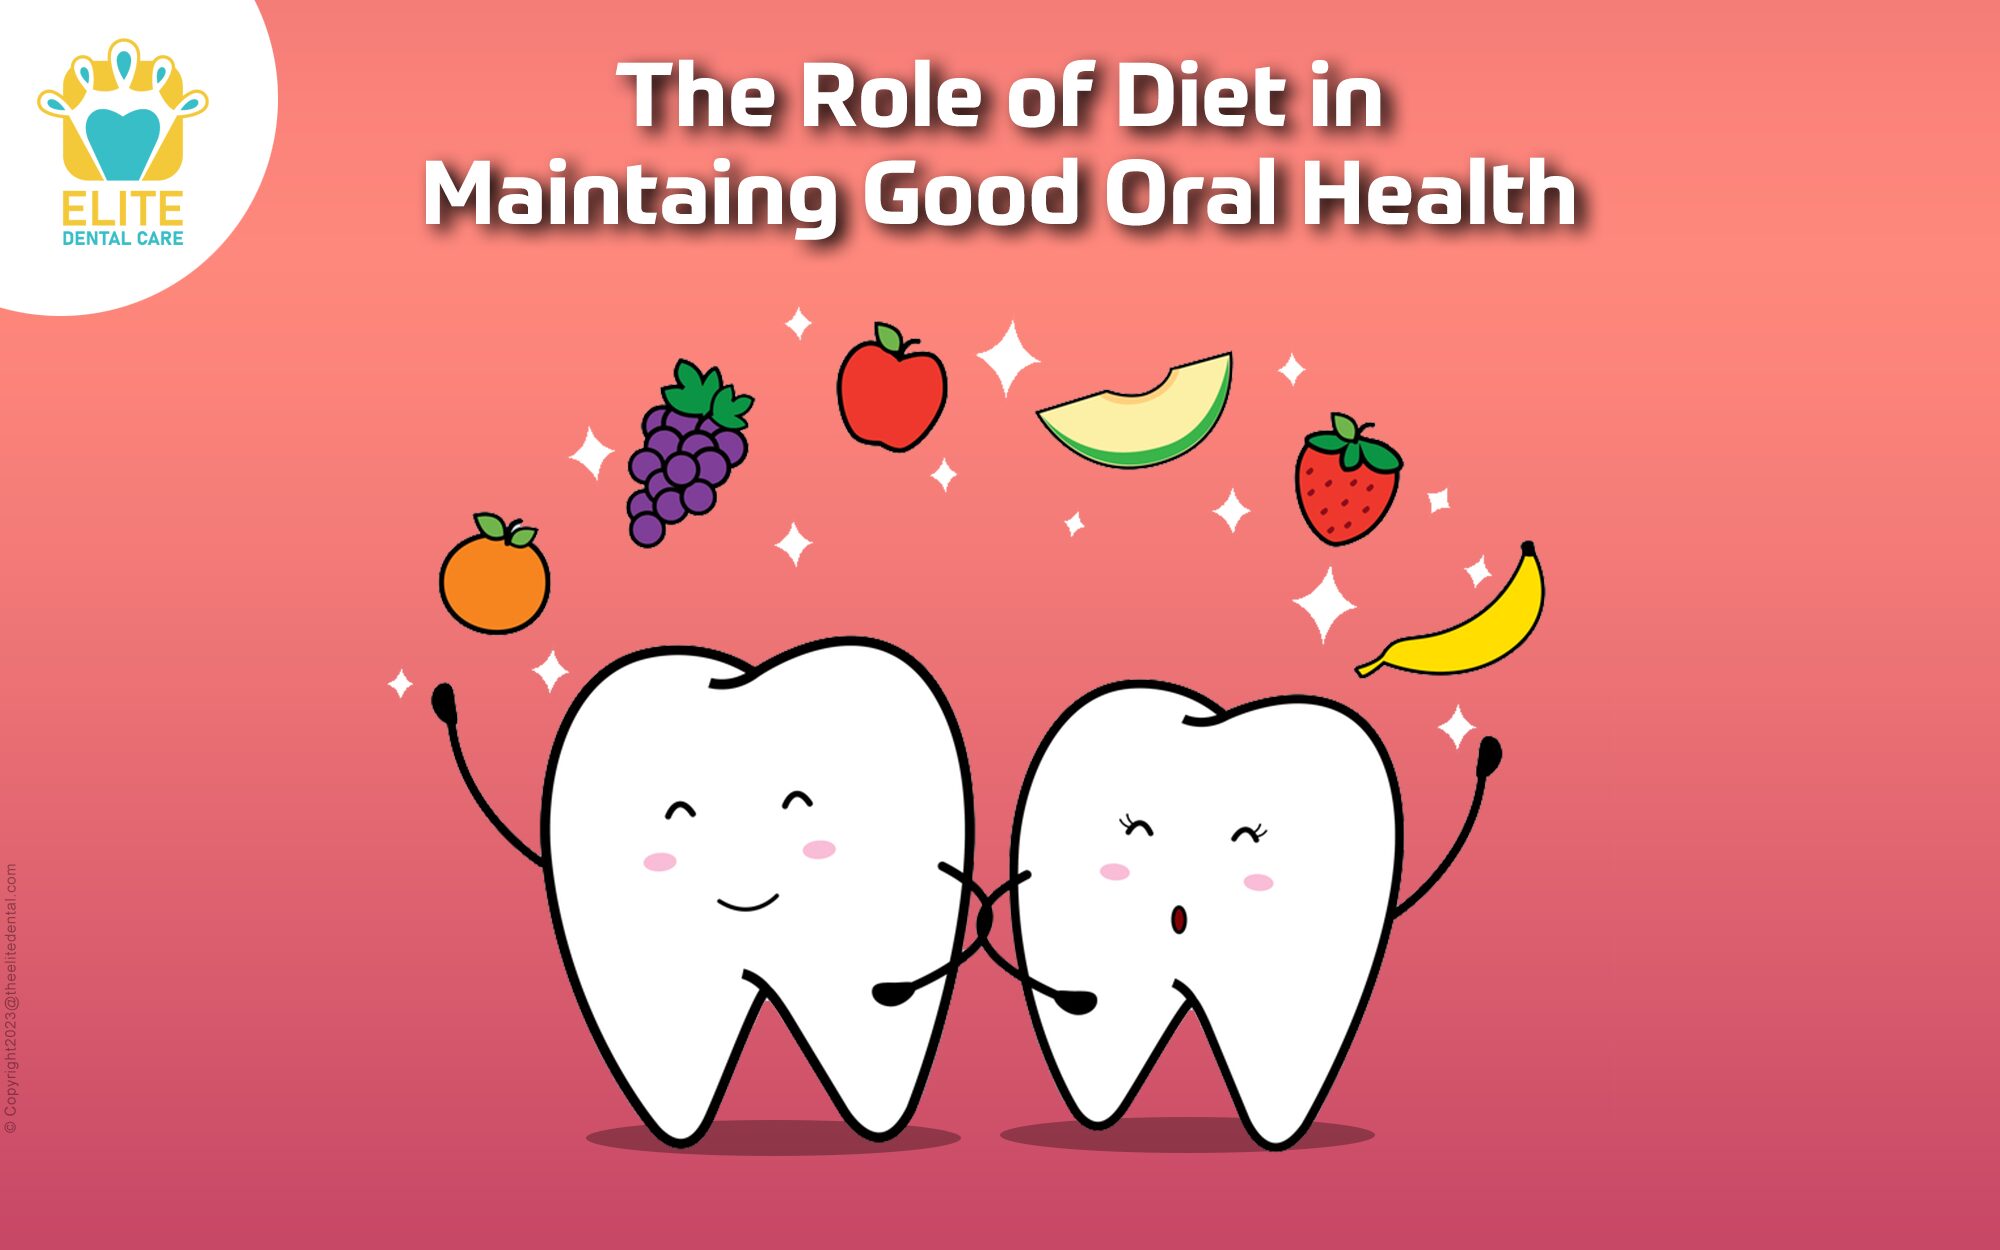 THE ROLE OF DIET IN MAINTAINING GOOD ORAL HEALTH